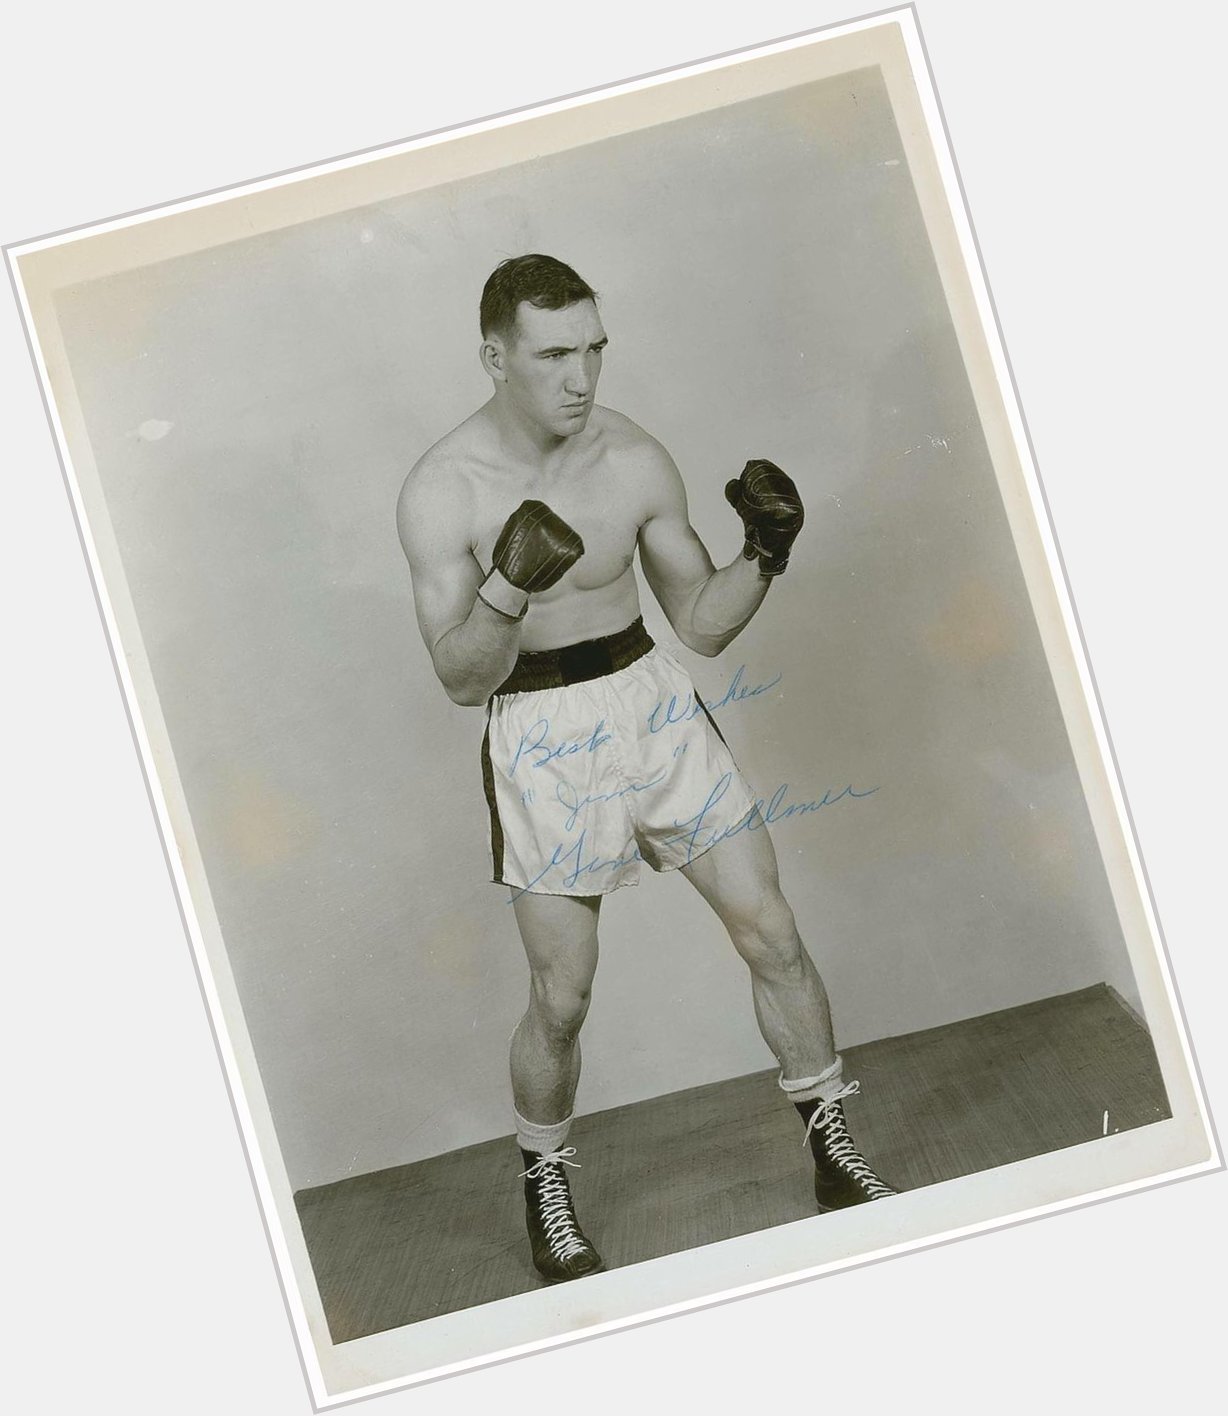 Happy Birthday to 1950s and 60s middleweight champion Gene Fullmer, born in 1931 